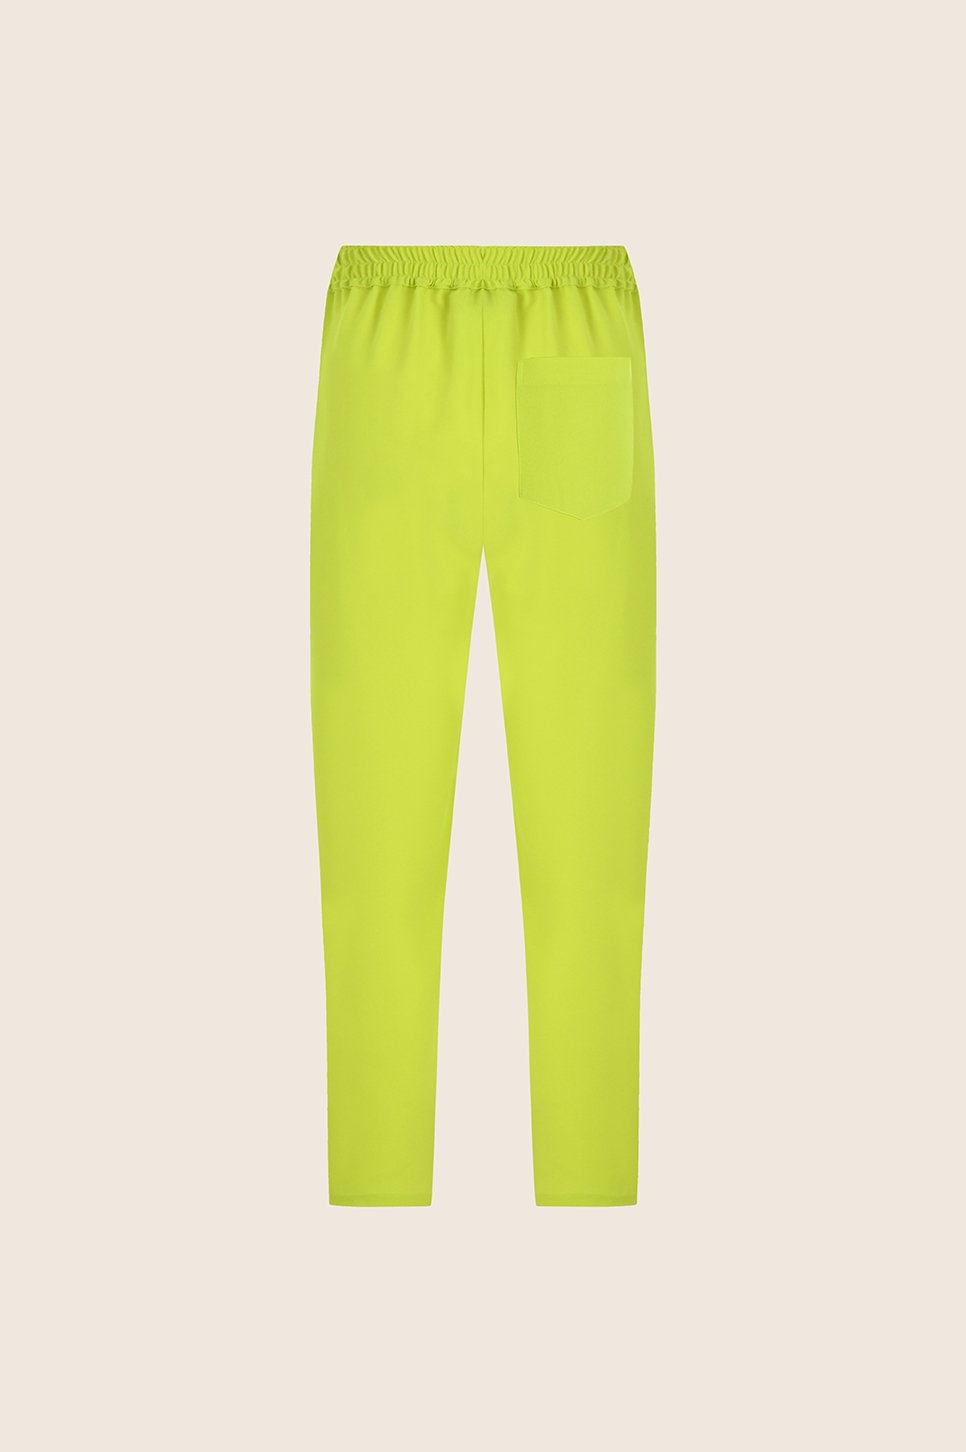 Oopscool - Crepe Cigarette Green Pant